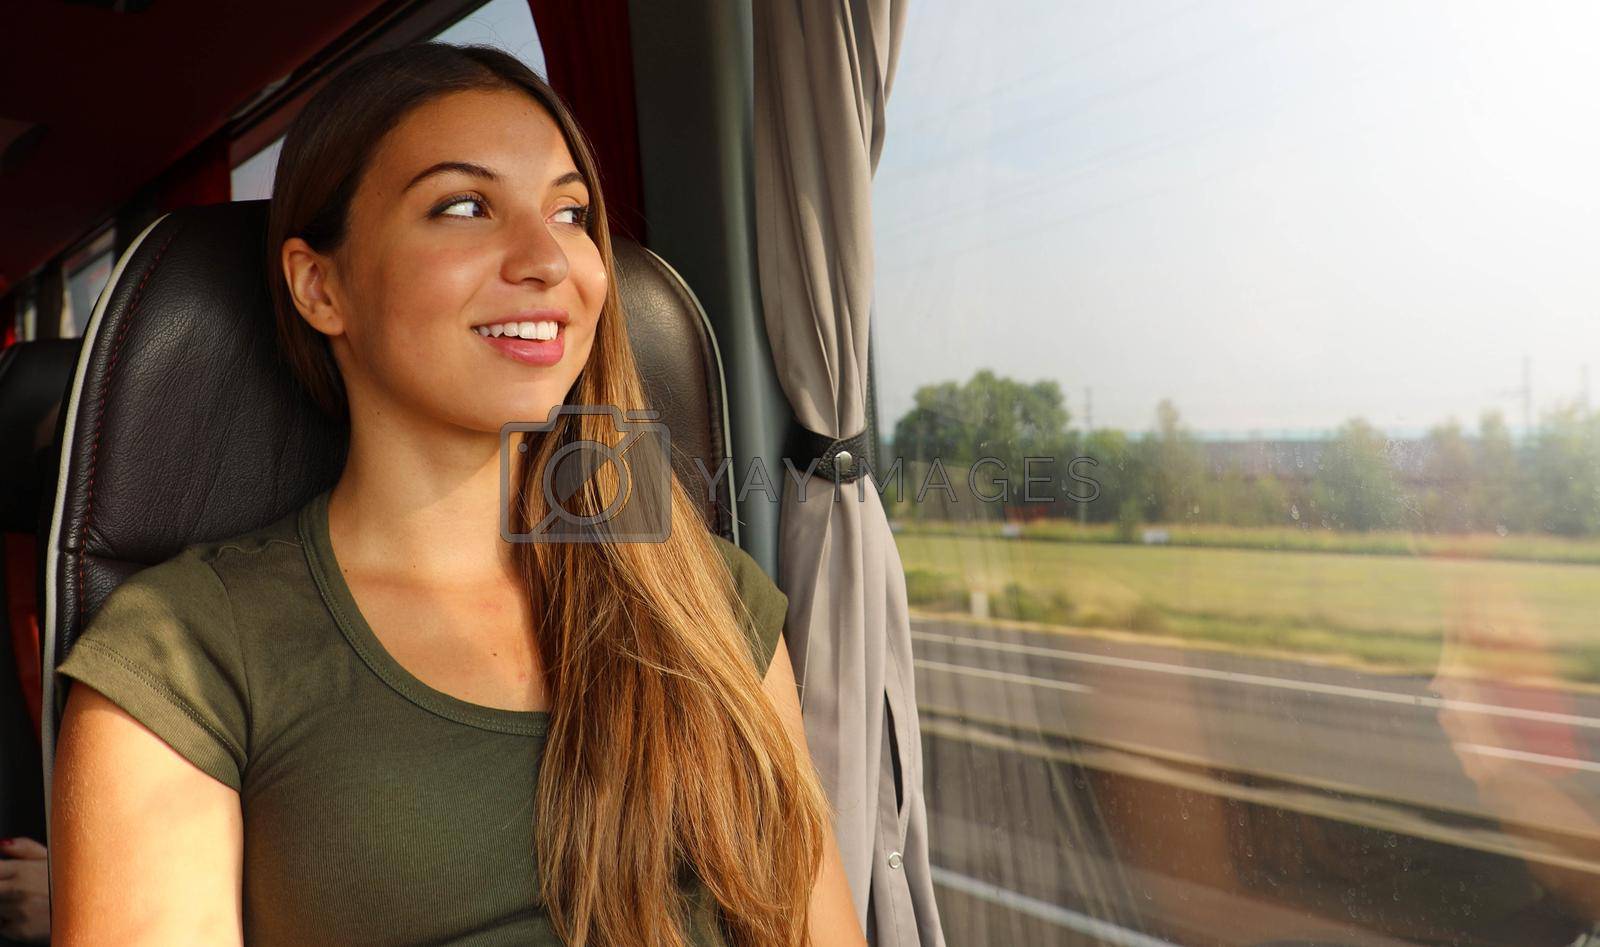 Train or bus travel. Beautiful smiling woman looking through the window during the trip on public transportation.